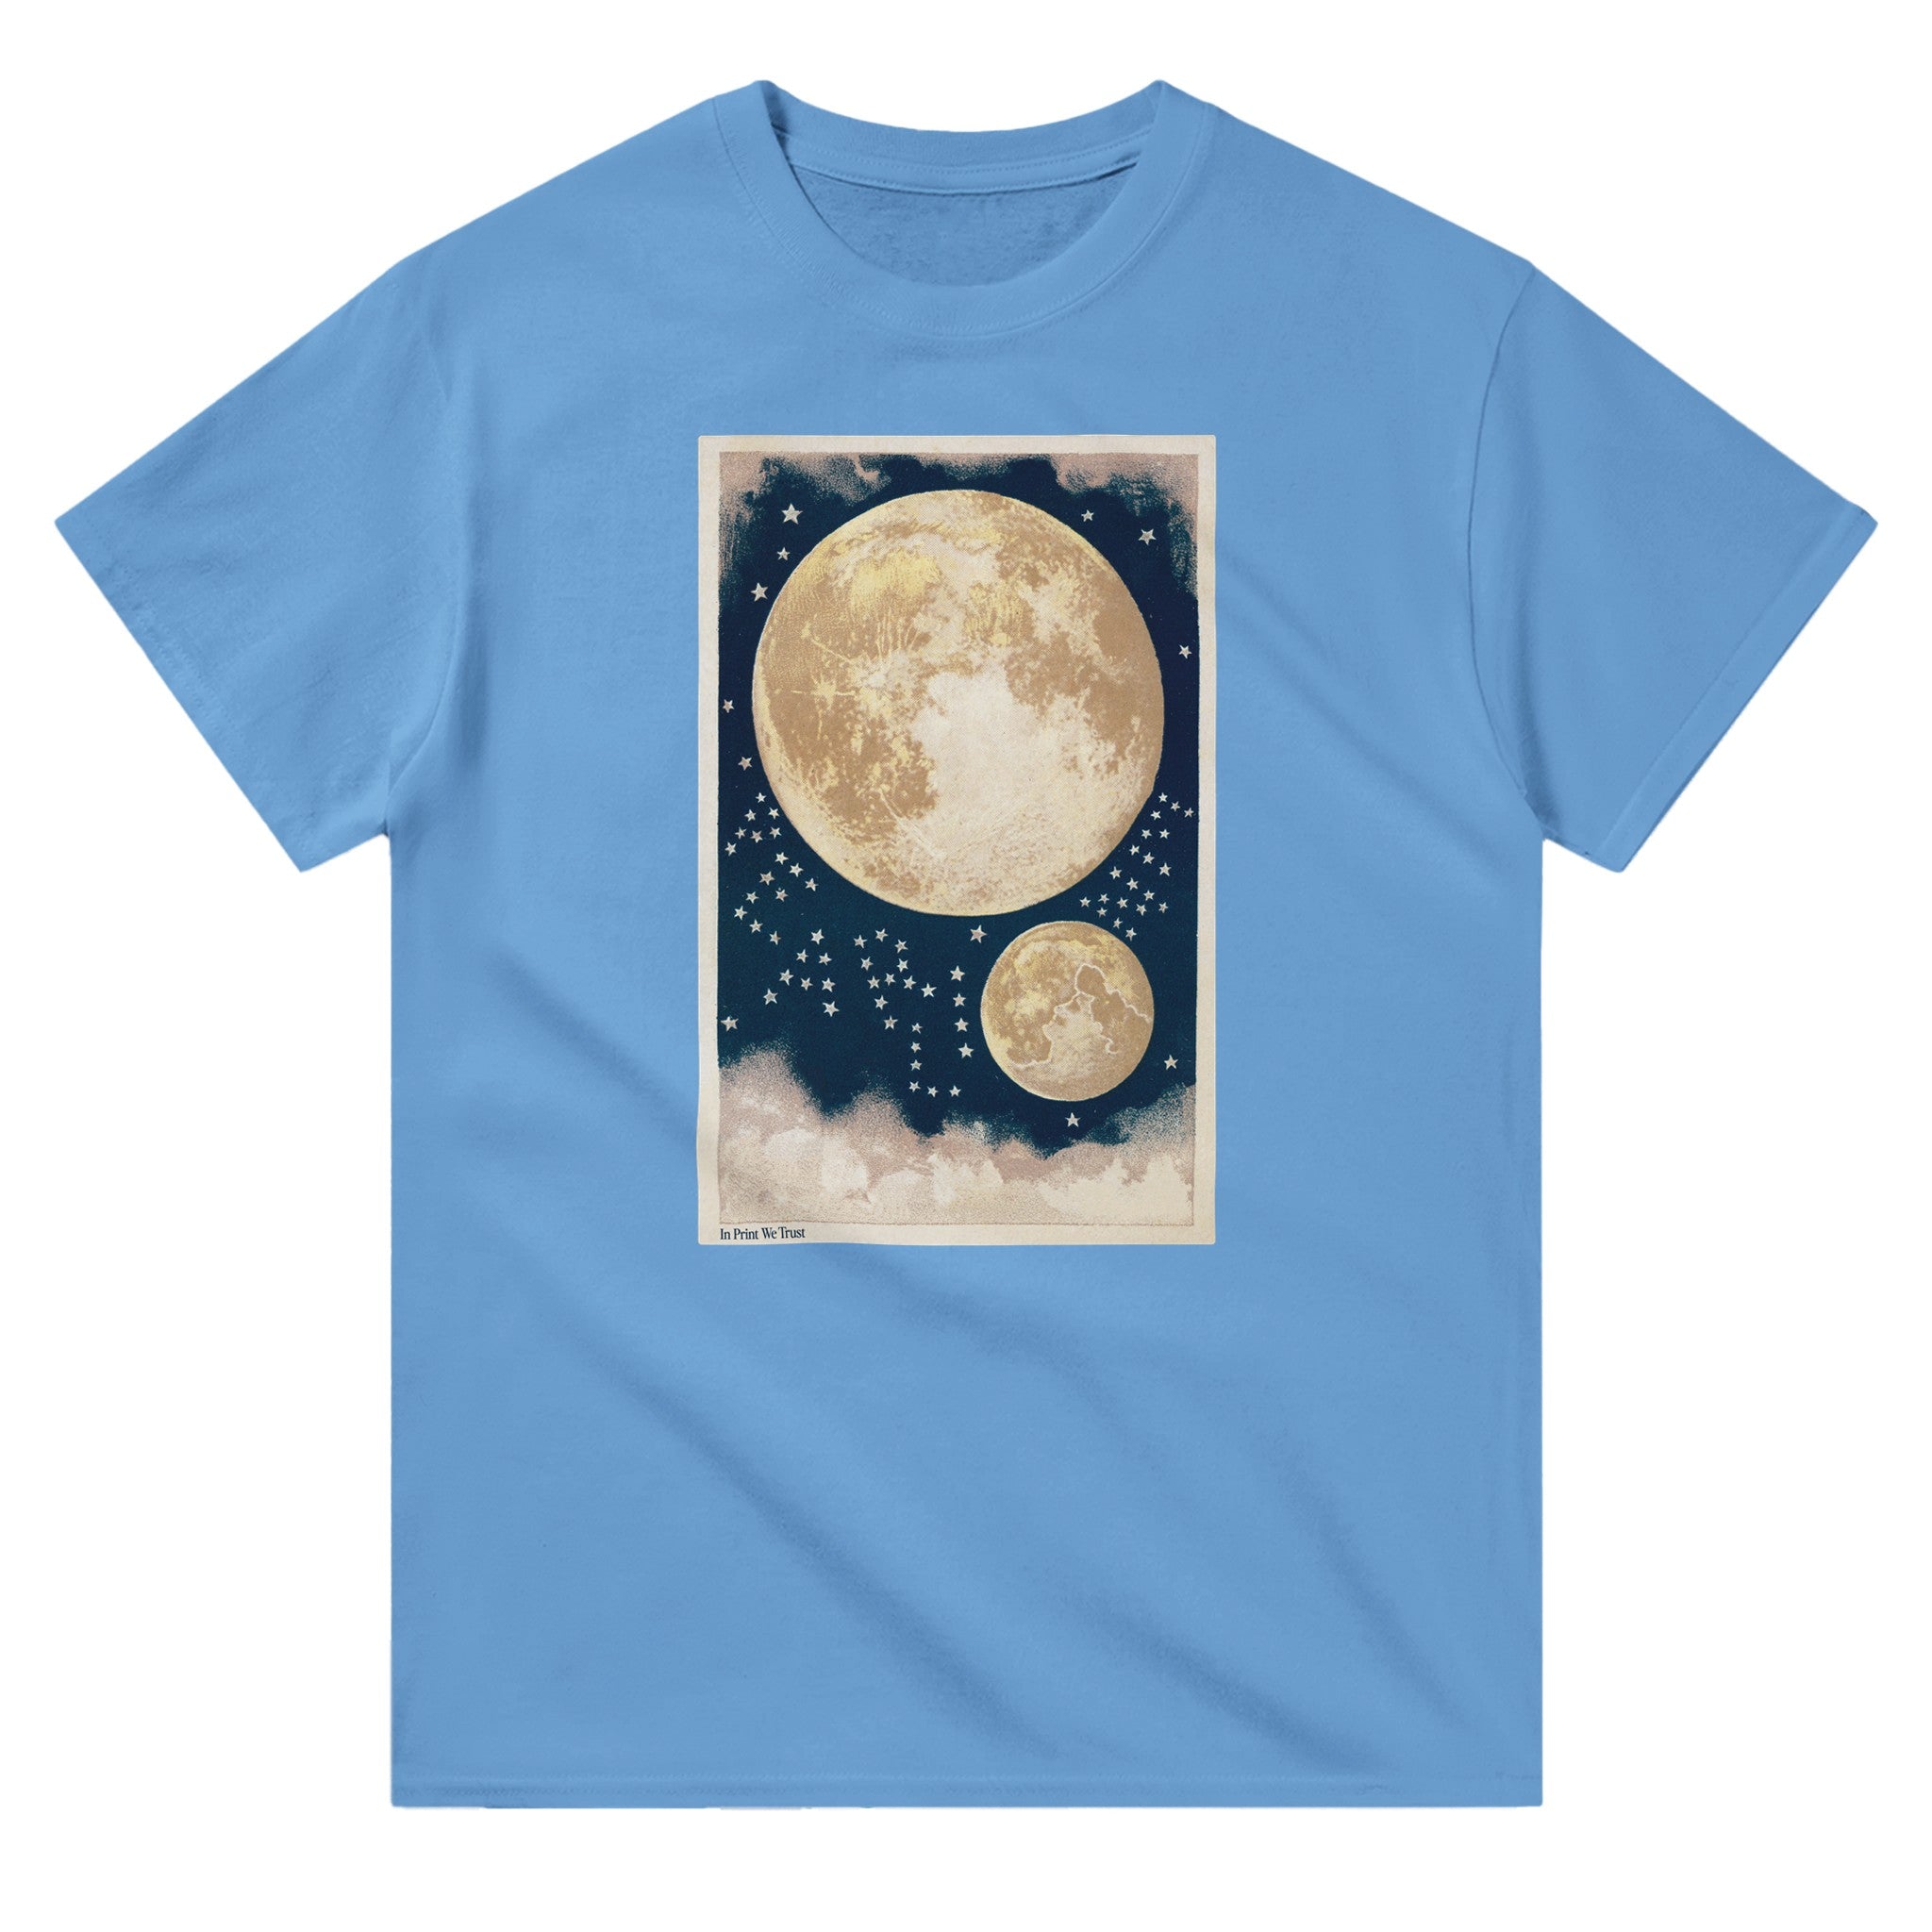 'To the moon and back' classic tee - In Print We Trust